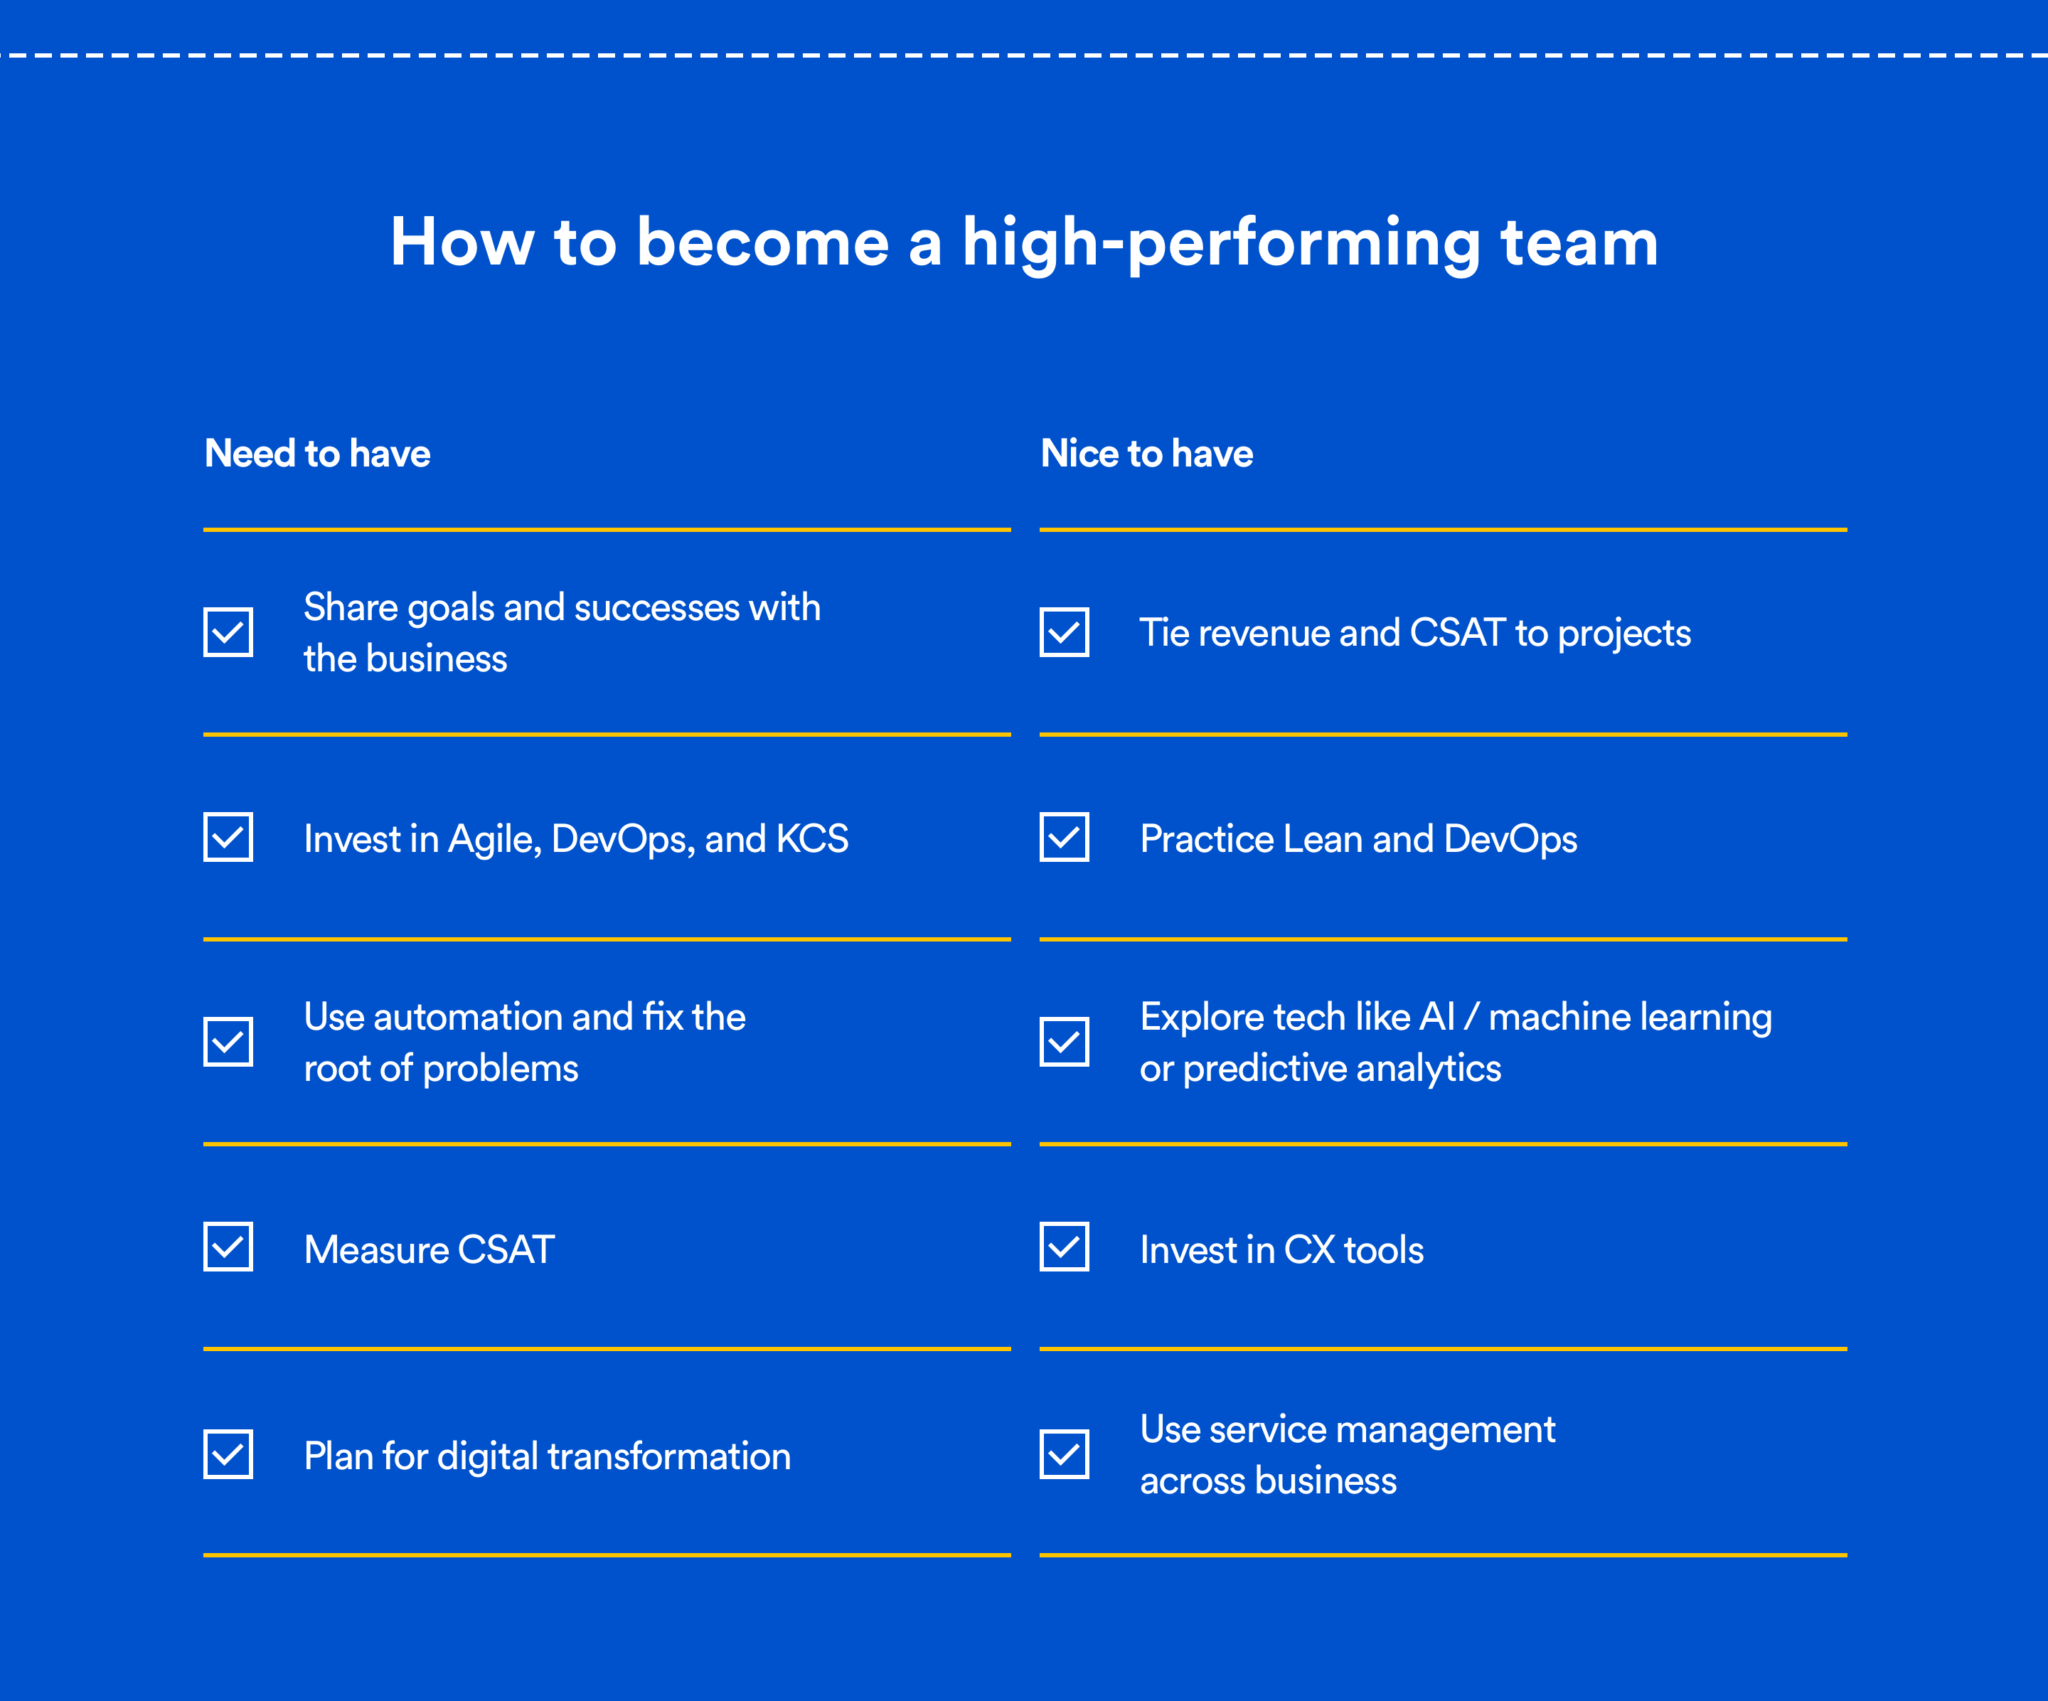 How to become a high-performing team